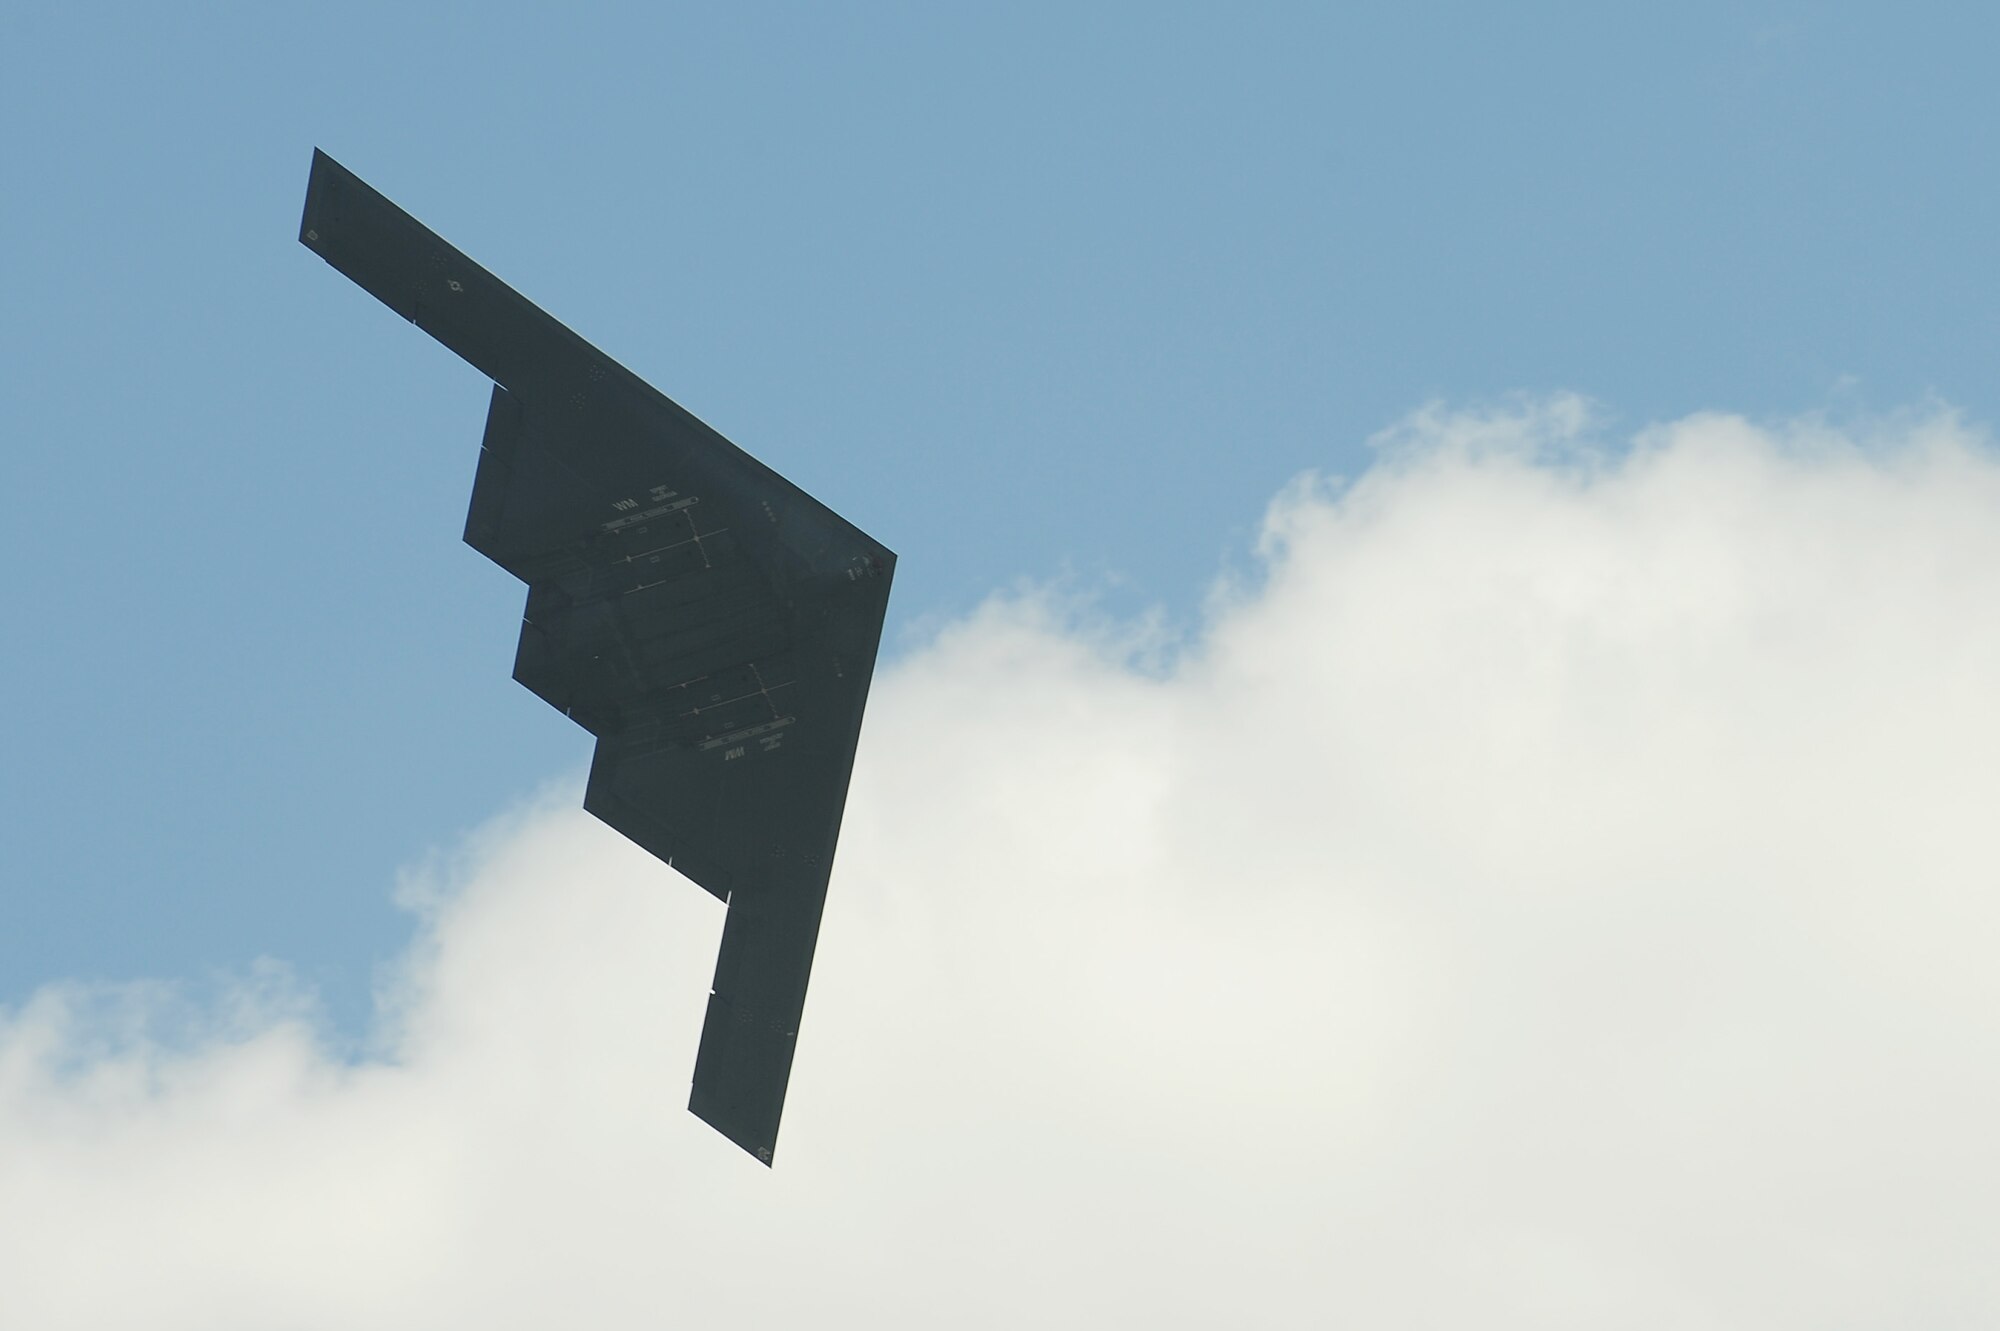 A 509th Bomb Wing B-2 Spirit conducts a fly-by during the Scott Air Force Base 2017 Air Show and Open House June 11, which celebrates the base’s 100th anniversary.  The B-2 is a multi-role bomber capable of delivering both conventional and nuclear munitions and represents a major milestone in the U.S. bomber modernization program.  With a crew of two pilots, this aircraft brings a massive firepower to bear, in a short time, anywhere on the globe through impenetrable defenses.  (U.S. Air Force photo by Tech. Sgt. Maria Castle)